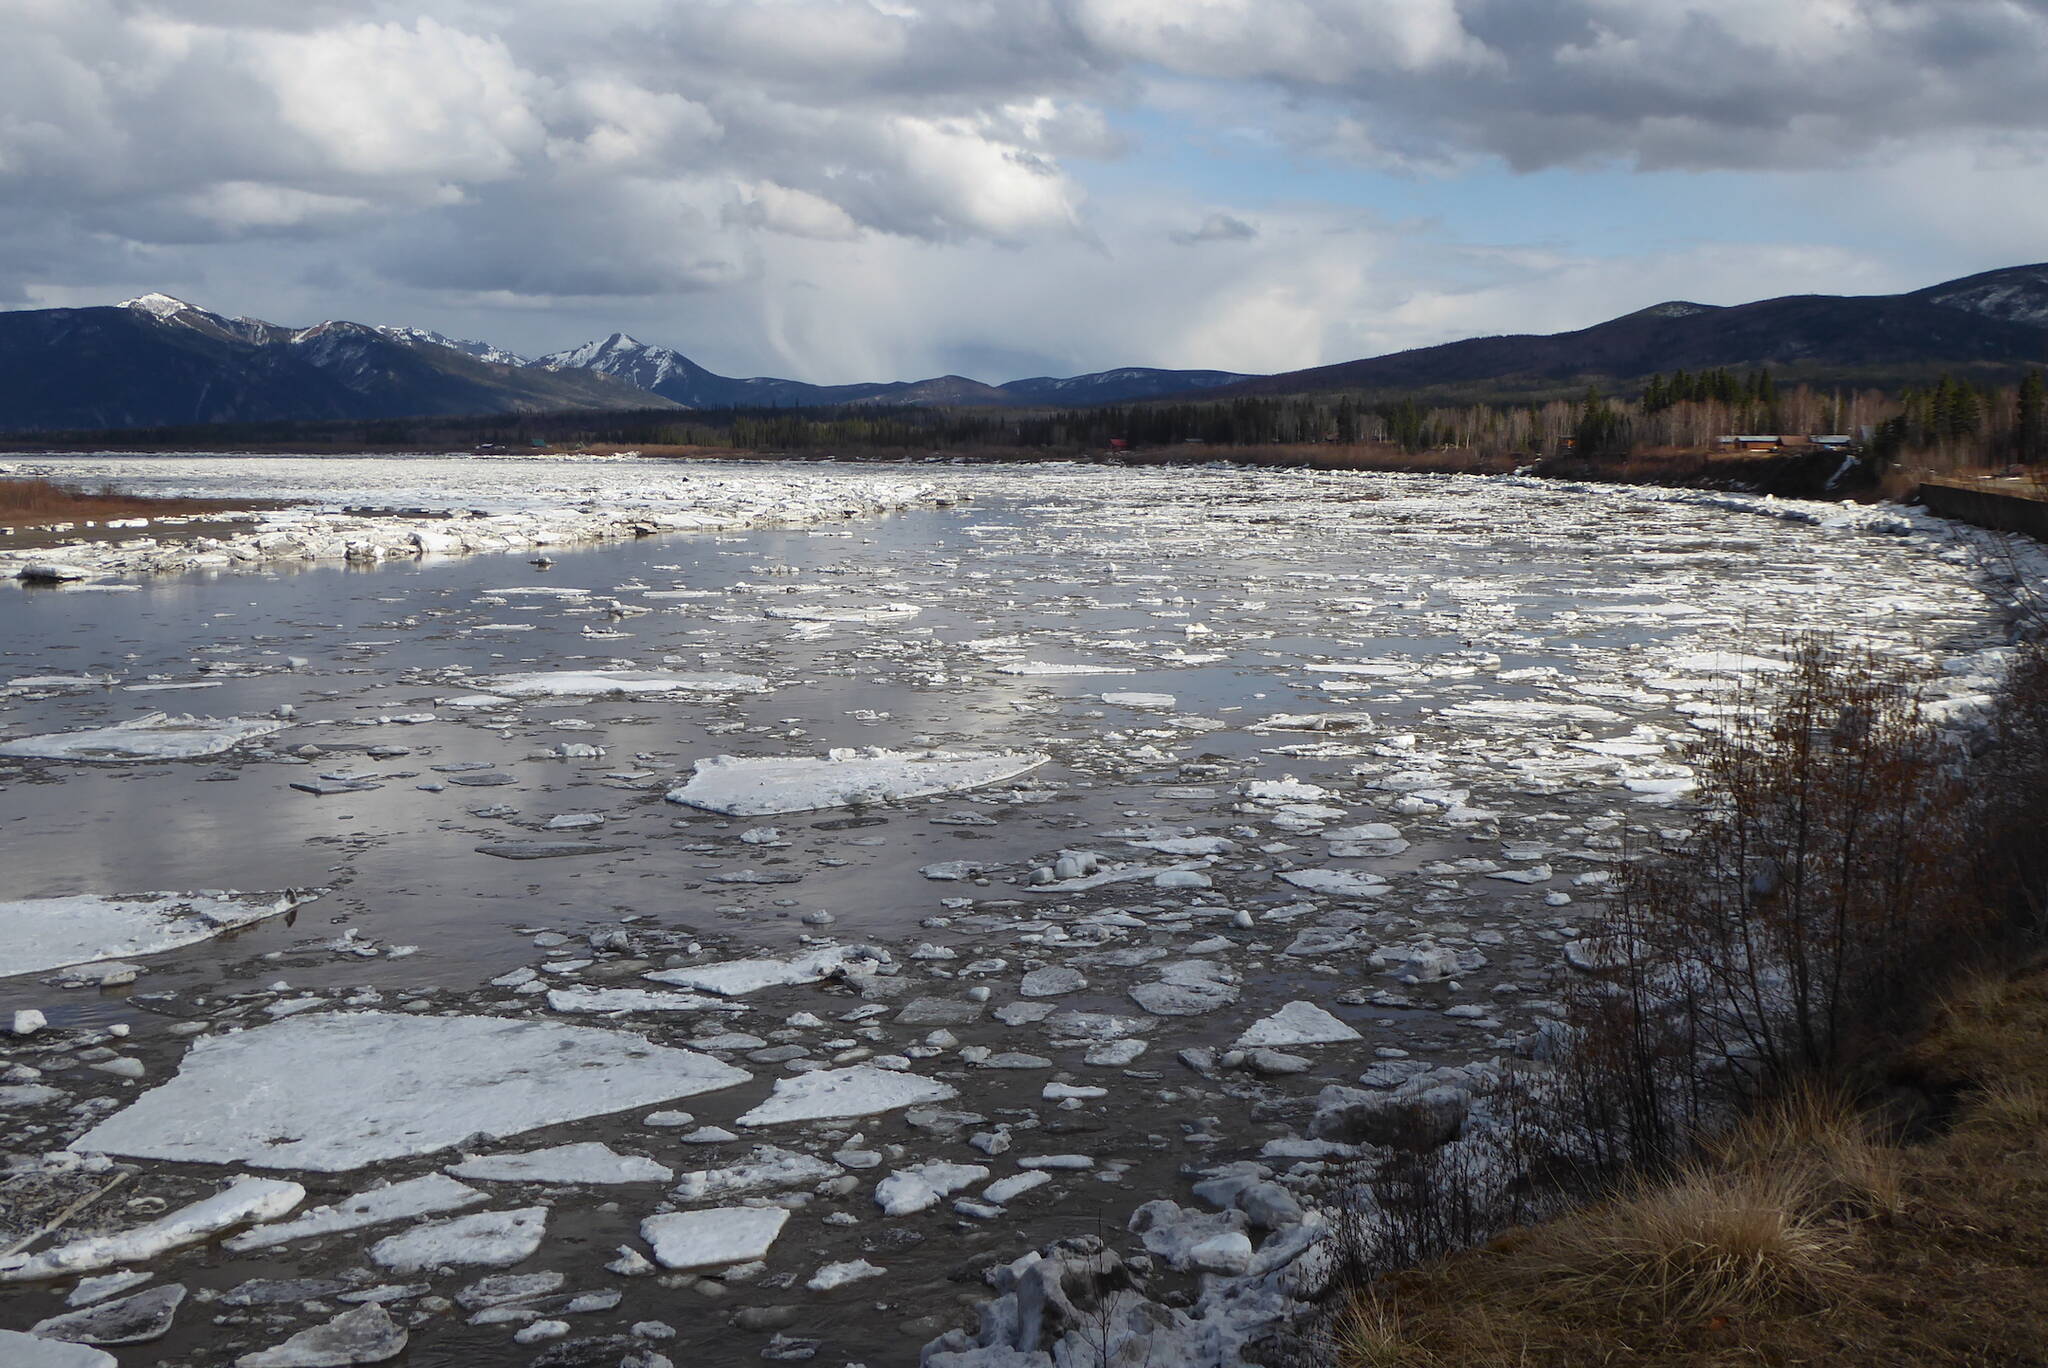 Yukon River ice flows down from the Canada portion of the river about 24 hours after the river broke up in front of Eagle, Alaska, the first U.S. town on the Yukon. (Courtesy Photo / Ned Rozell)